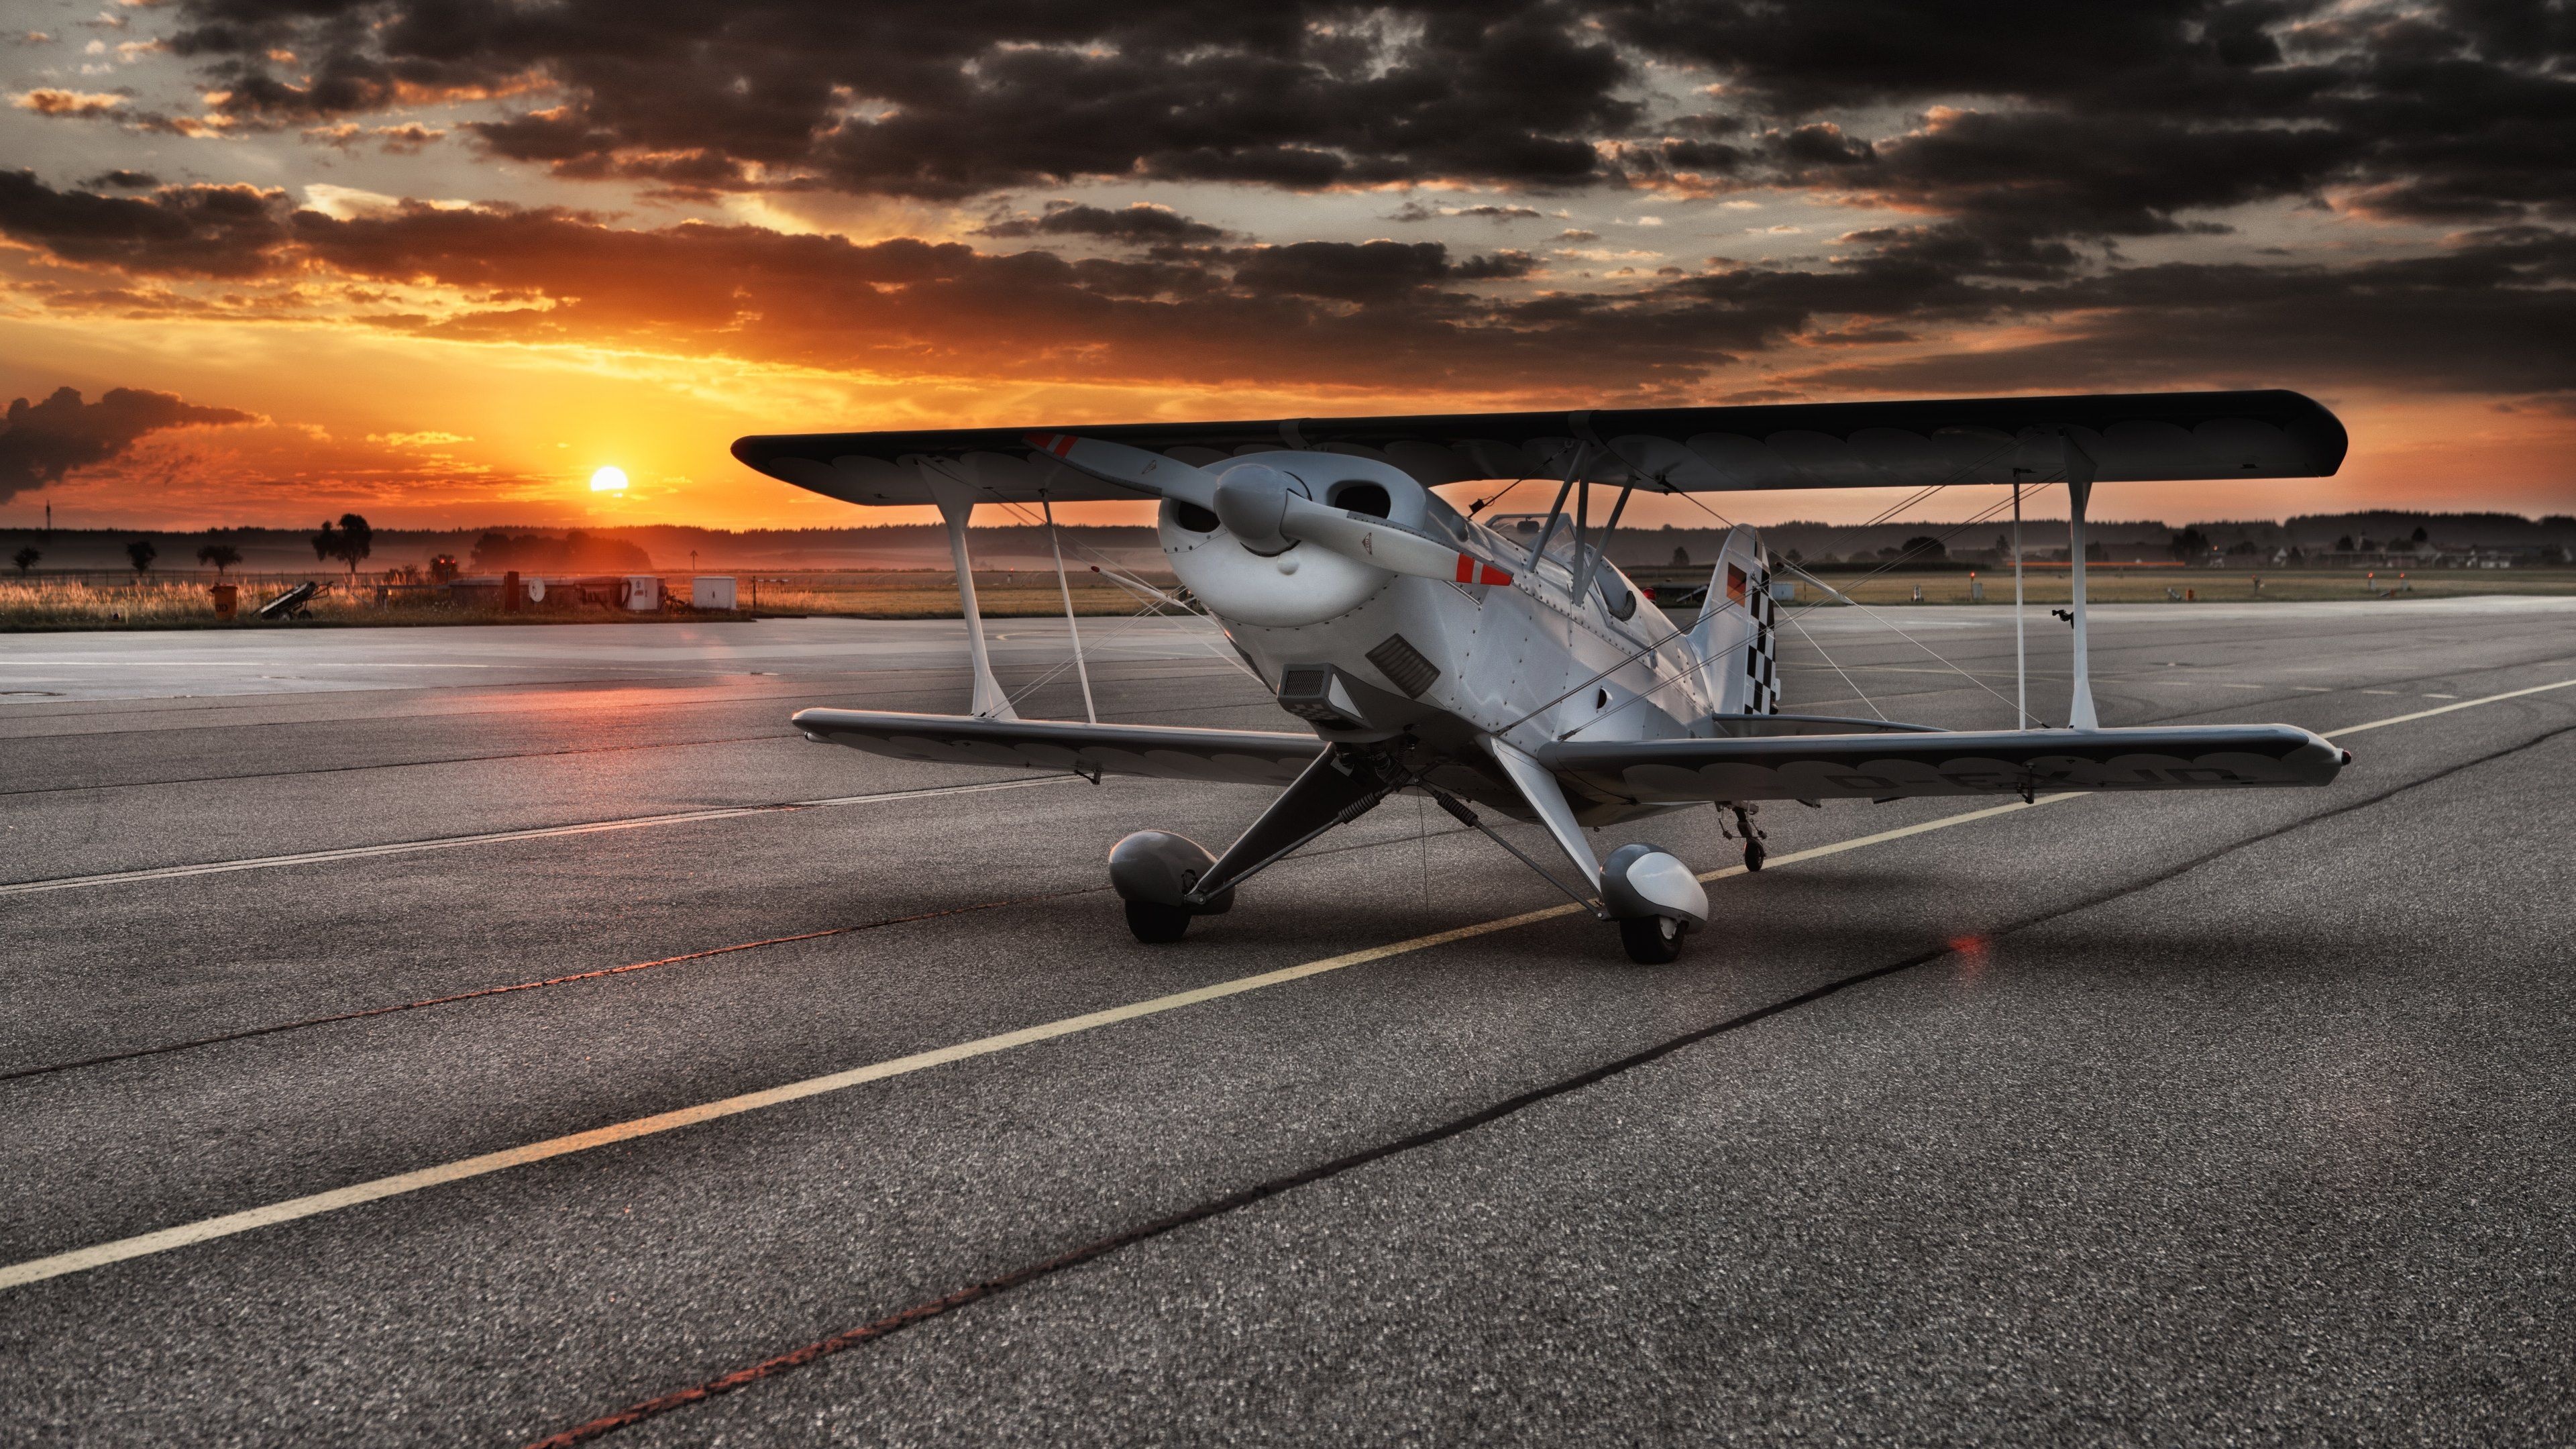 Small Plane Wallpapers - Top Free Small Plane Backgrounds 3840x2160